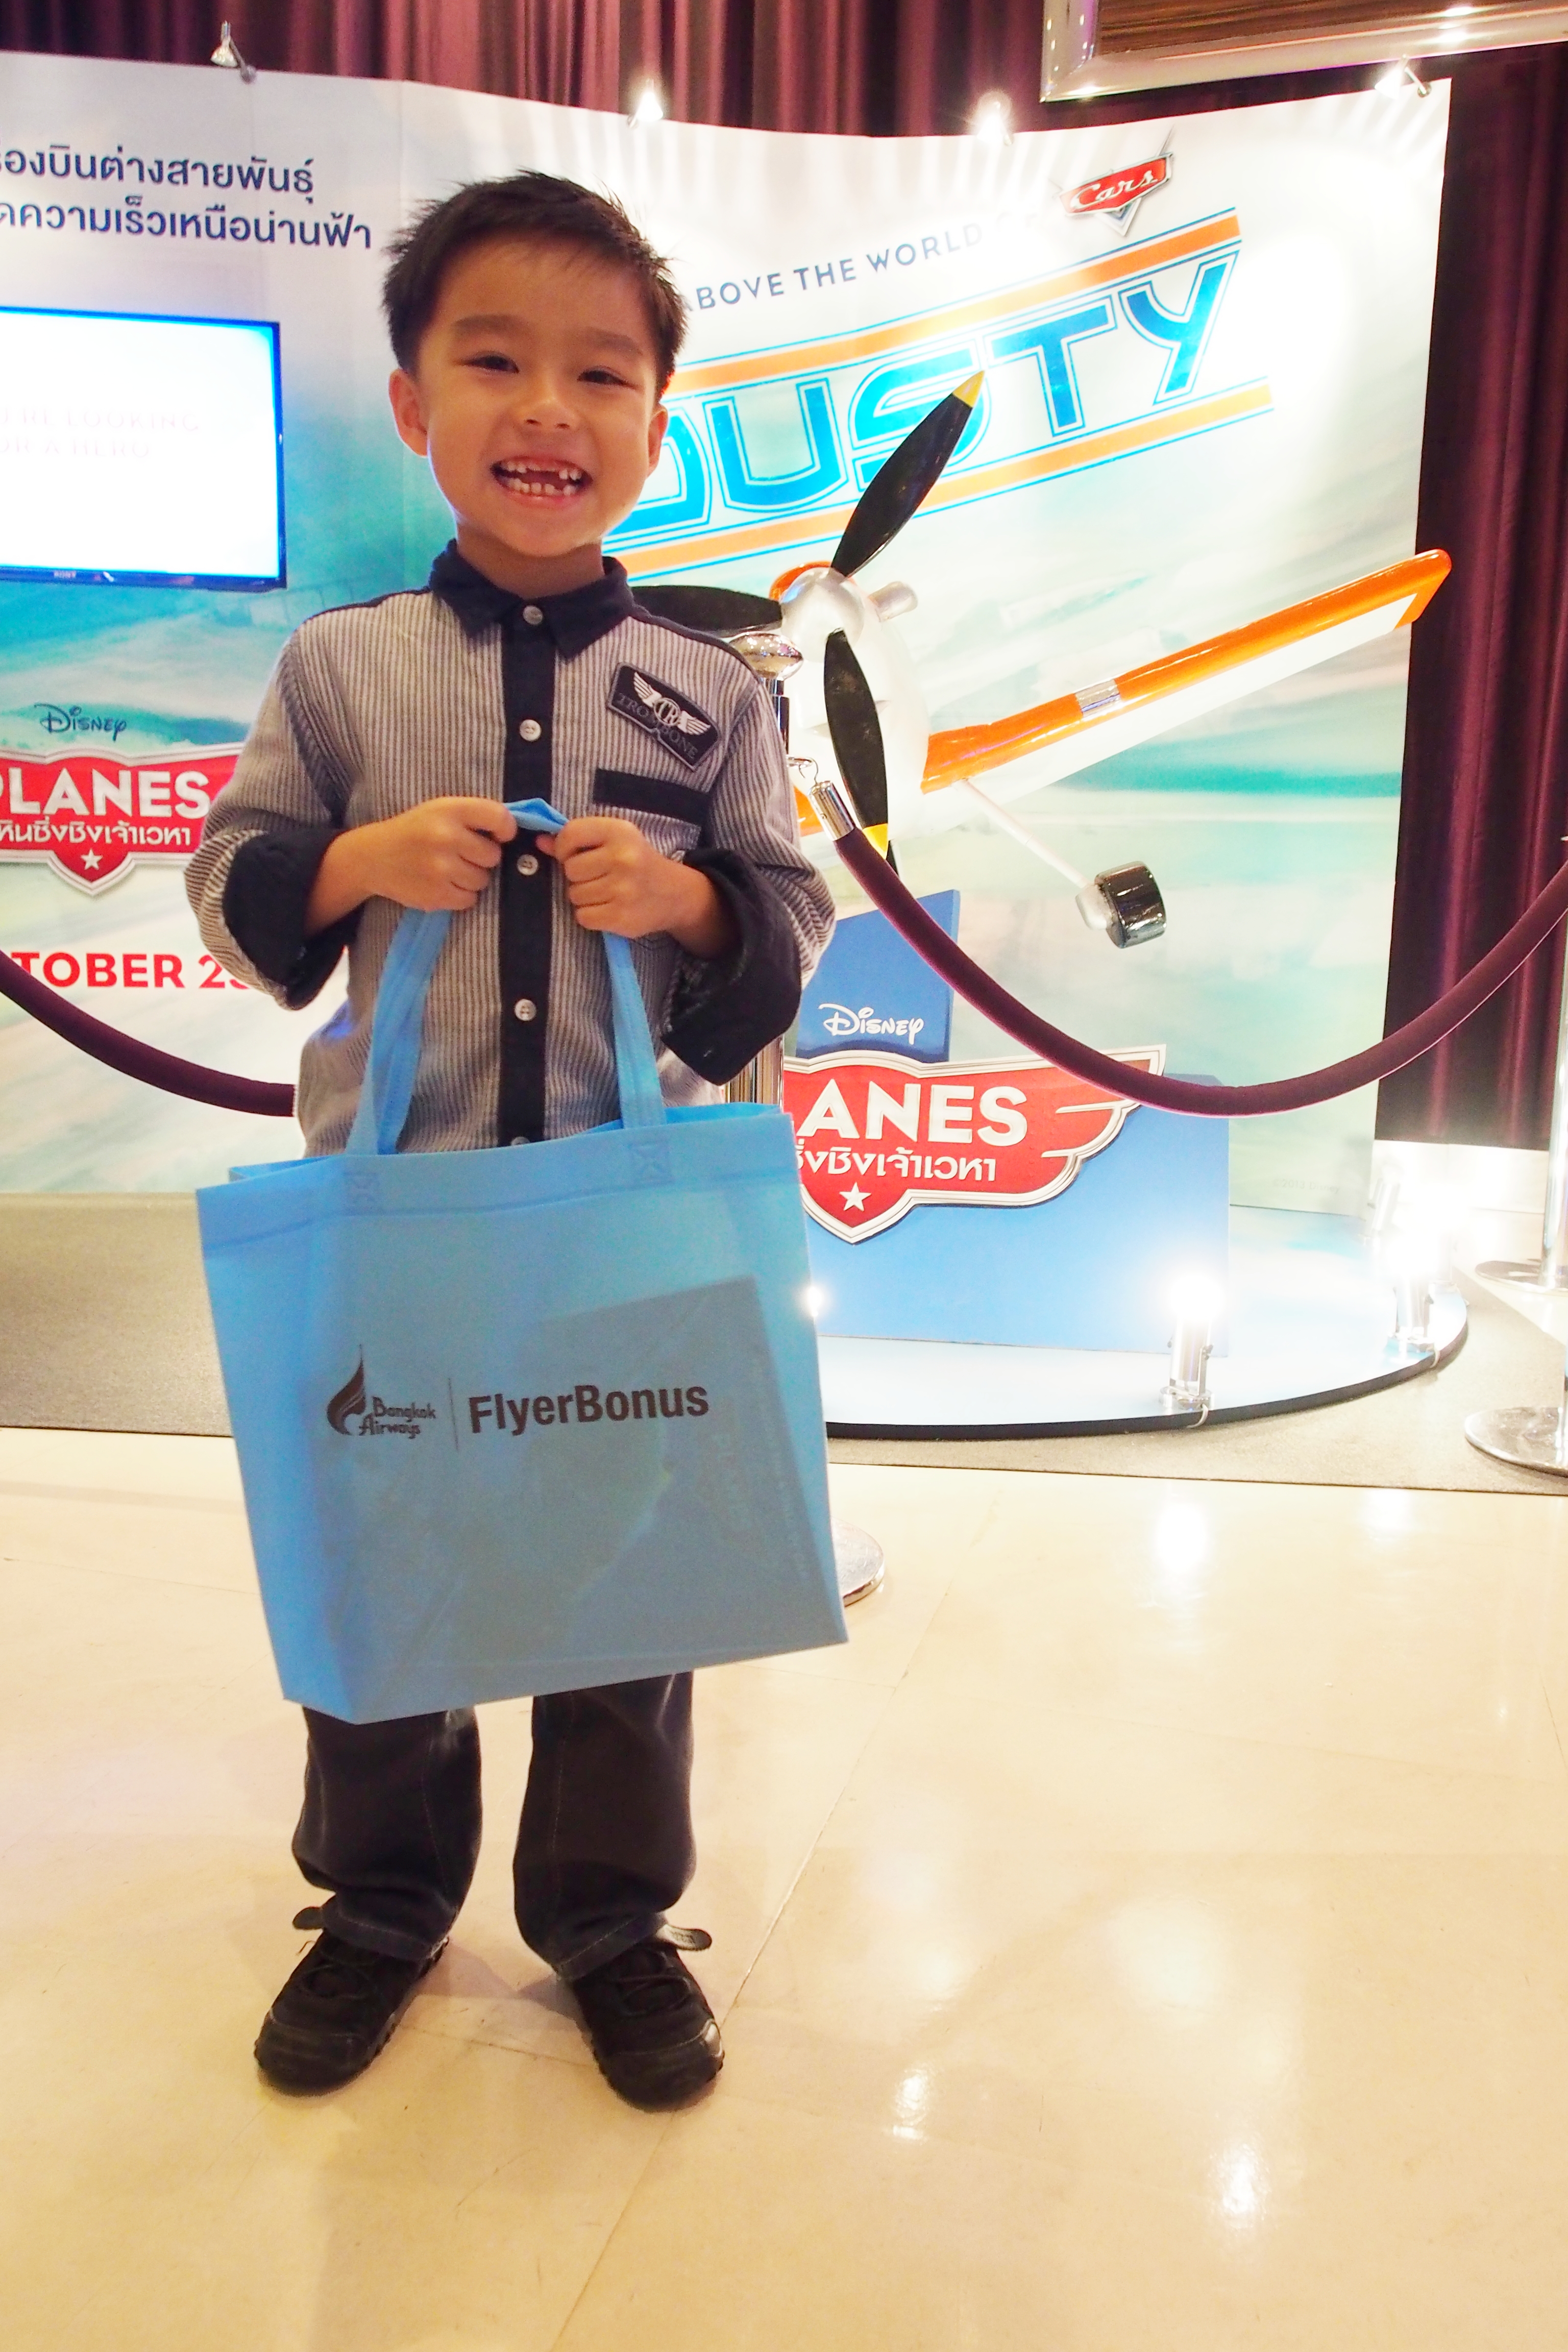 Our little guest is ready to enjoy "Planes" from DisneyToon Studios.